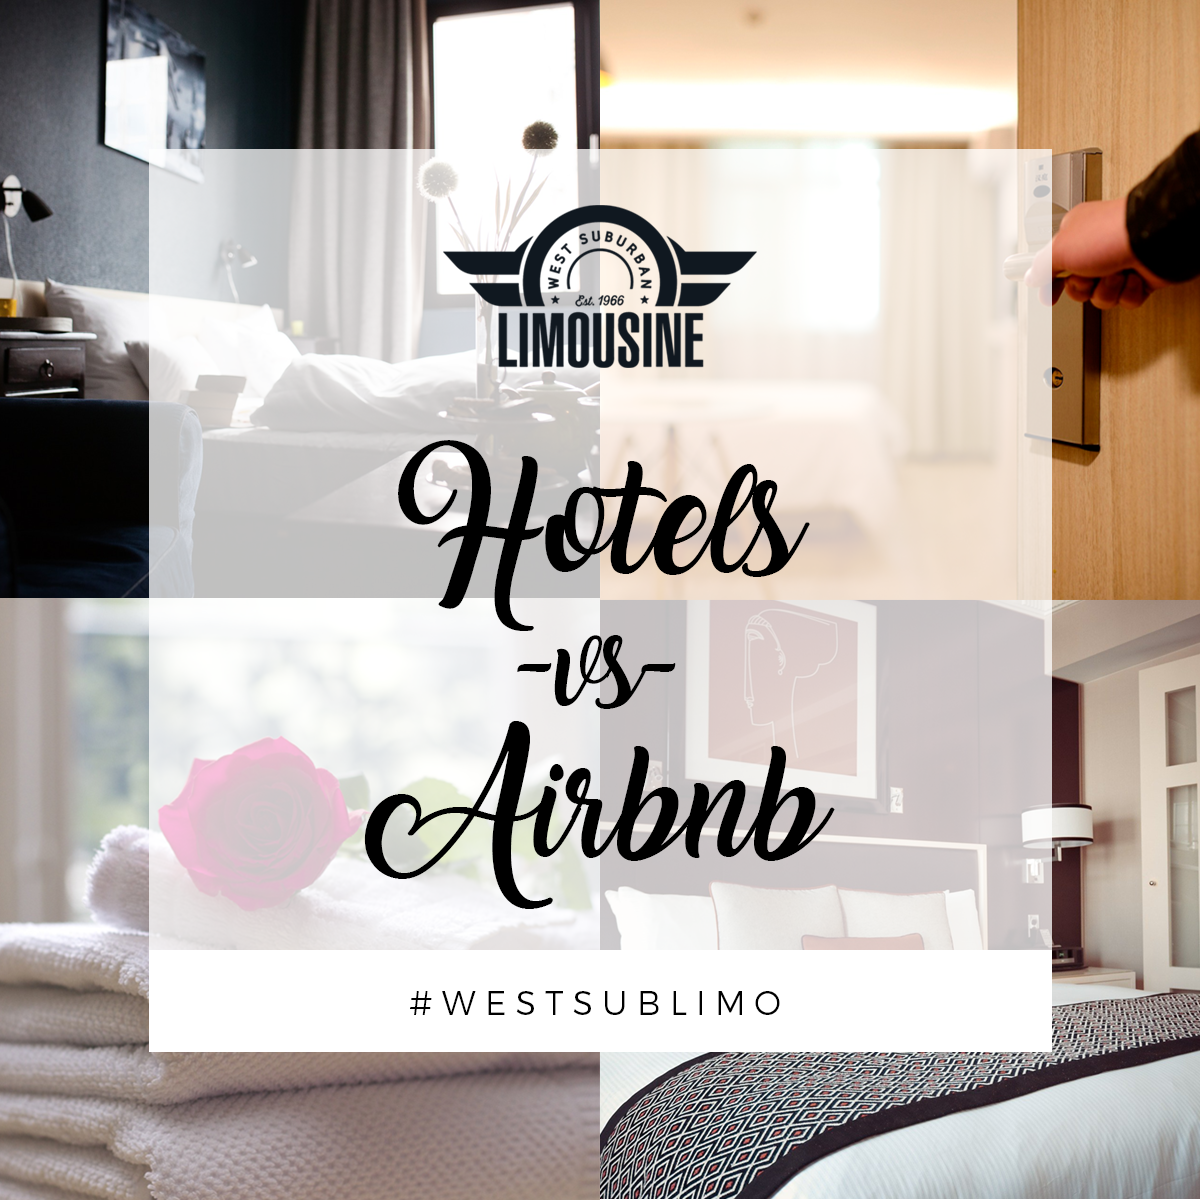 examining and comparing traditional hotels and airbnbs